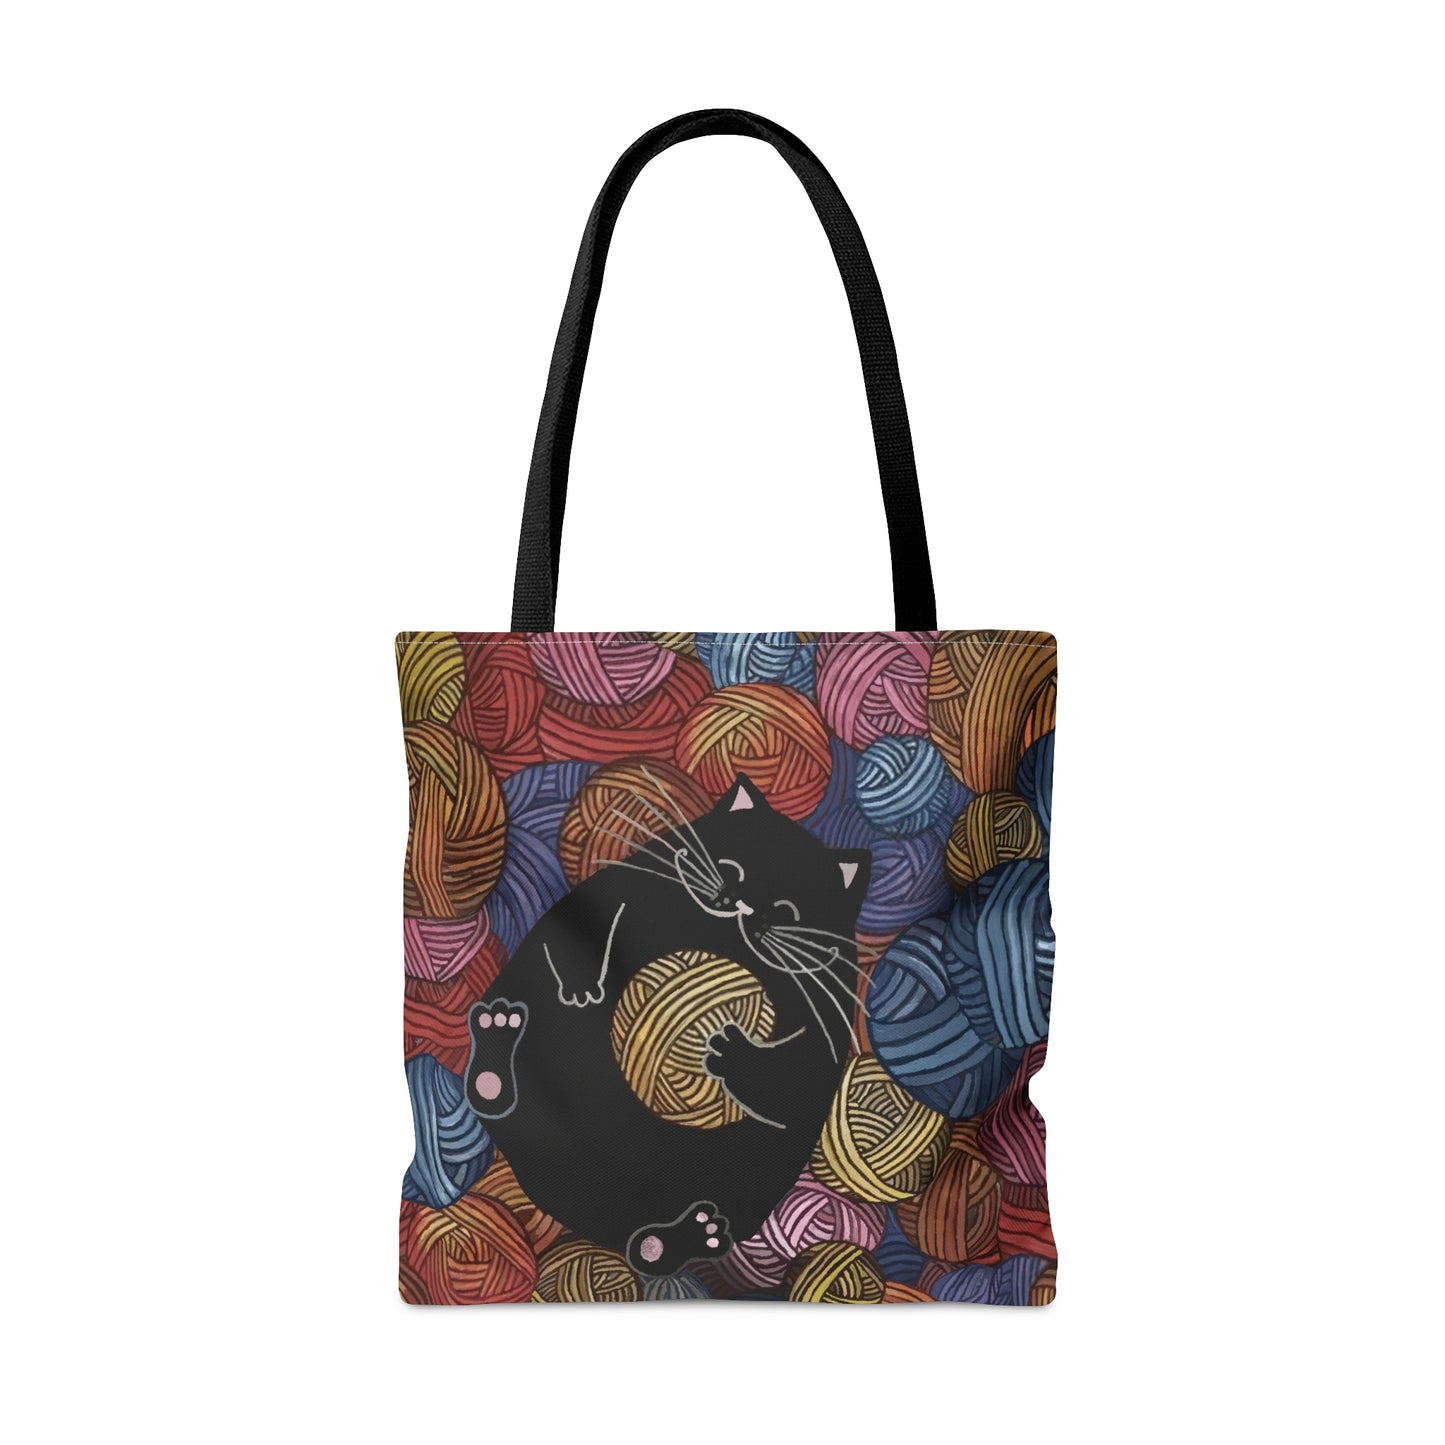 Tote Bag - Cat with Yarn Design